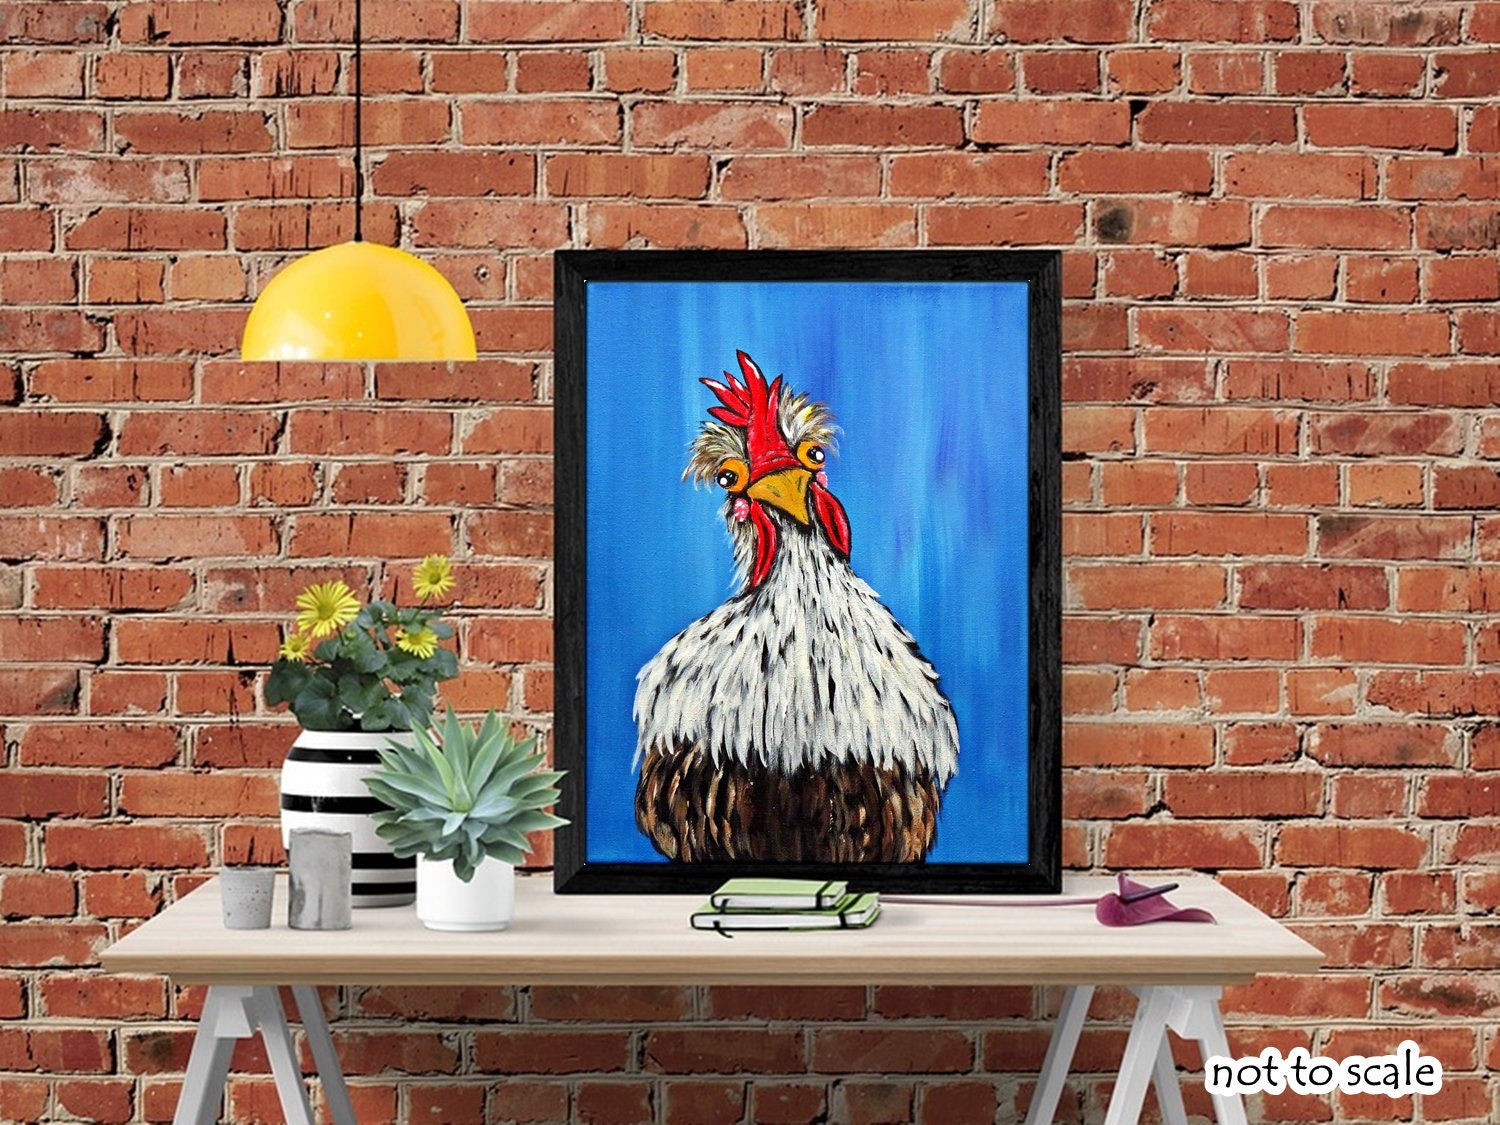 Handpainted Chicken Art, Original Acrylic Painting on Canvas, Whimsical